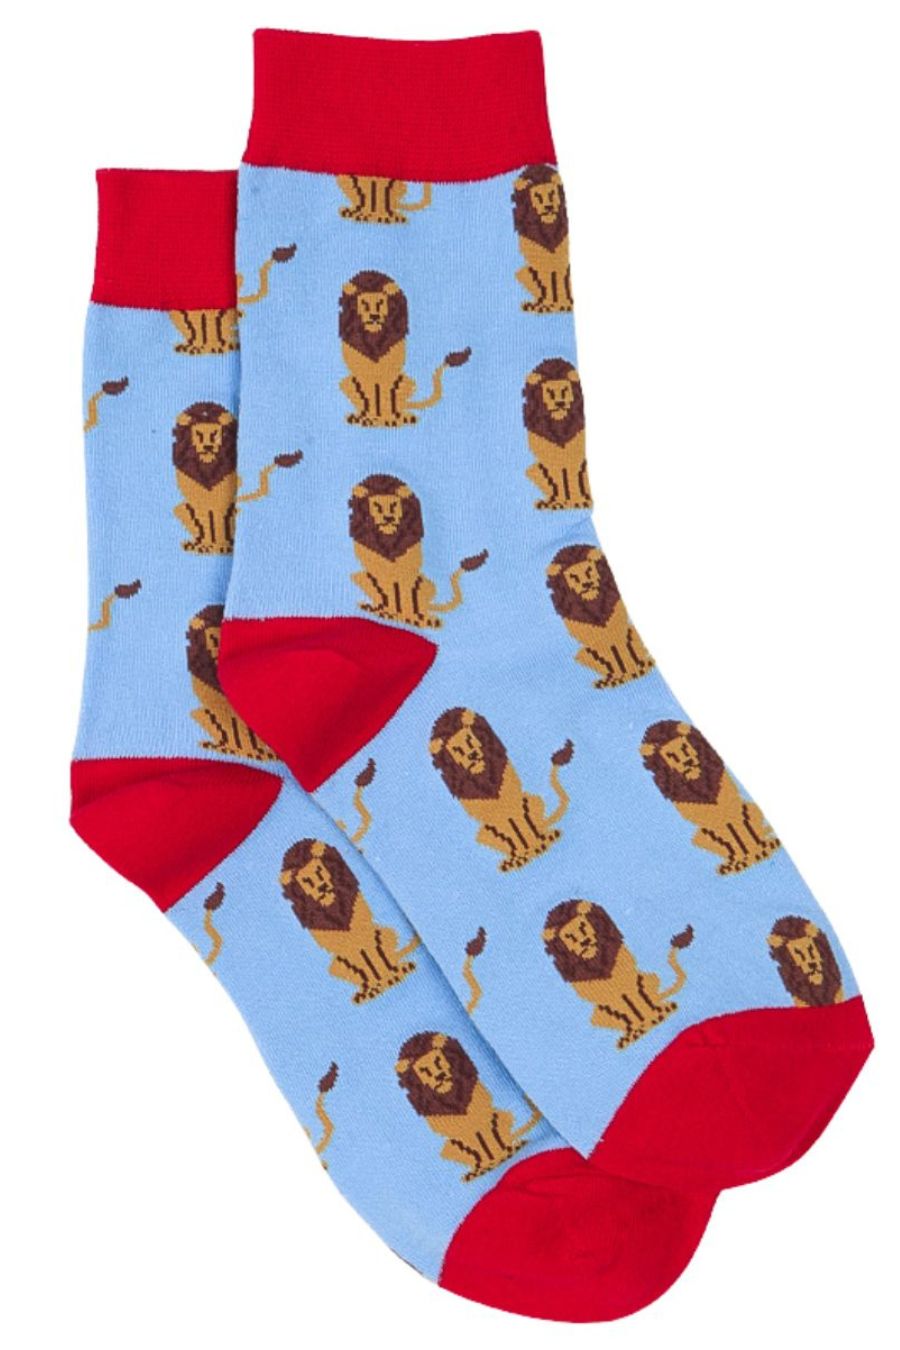 blue and red dress socks with an all over lion pattern